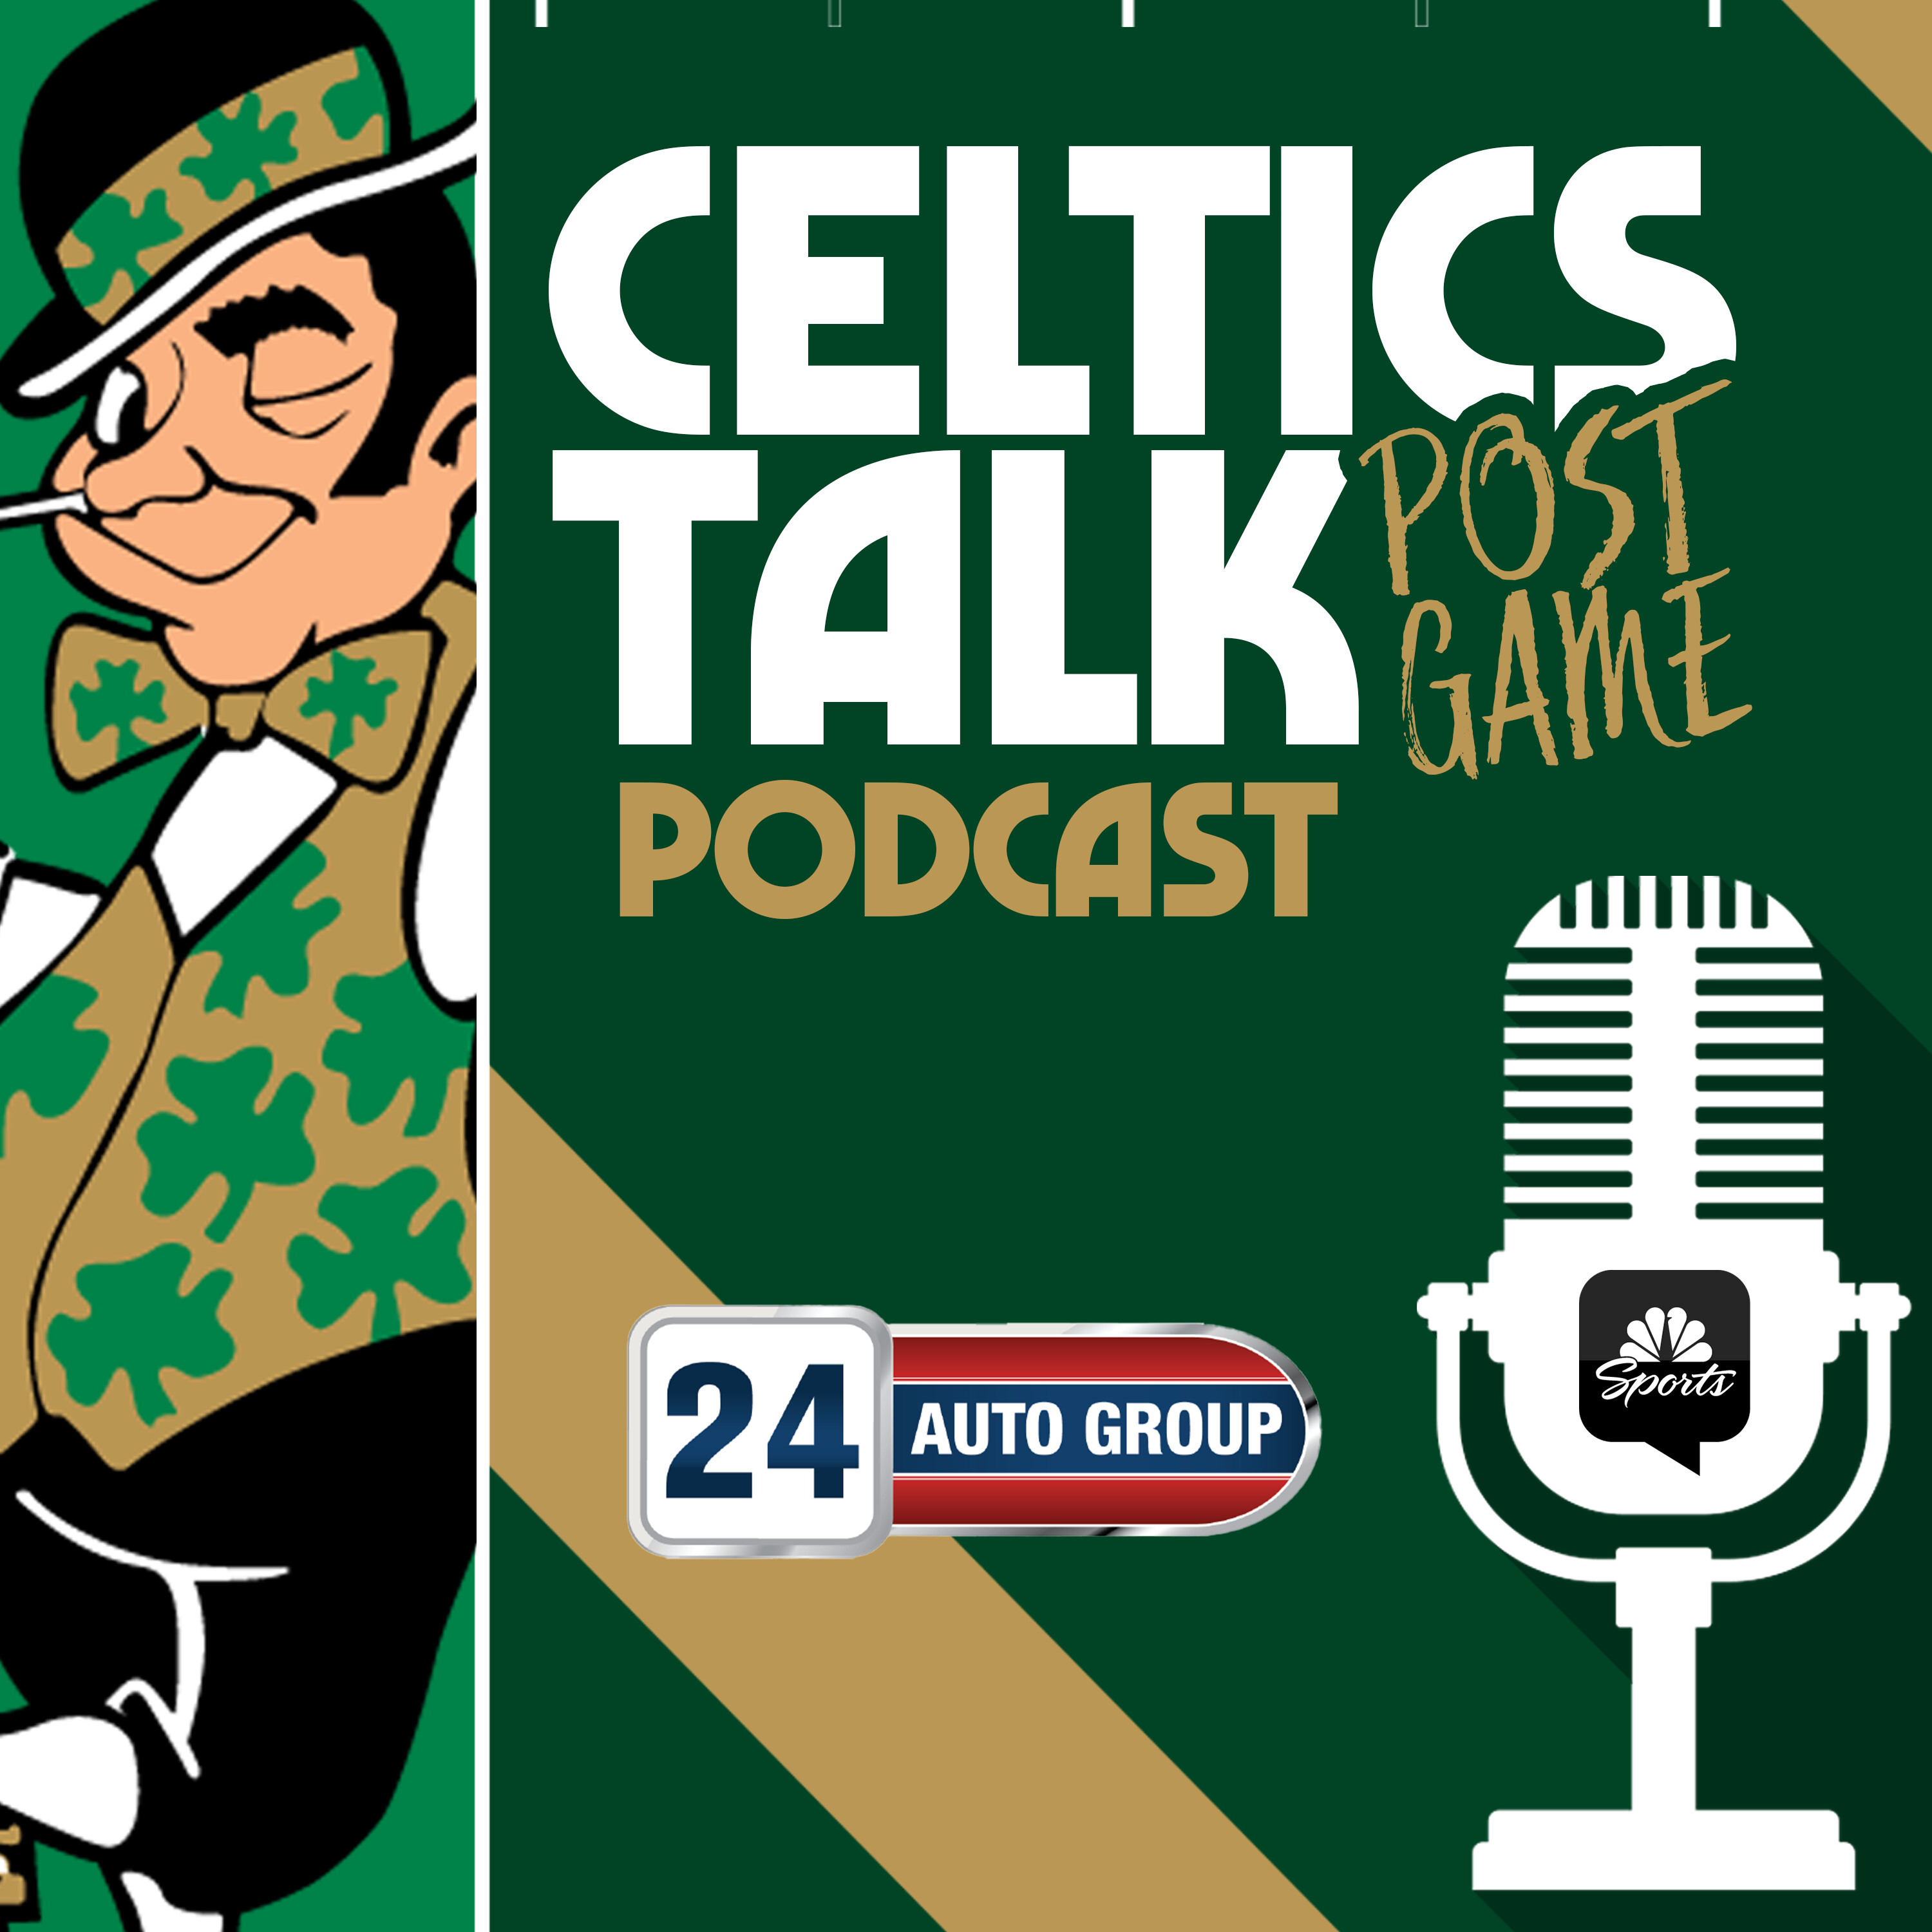 POSTGAME POD: Celtics beat Clippers to get fourth straight win